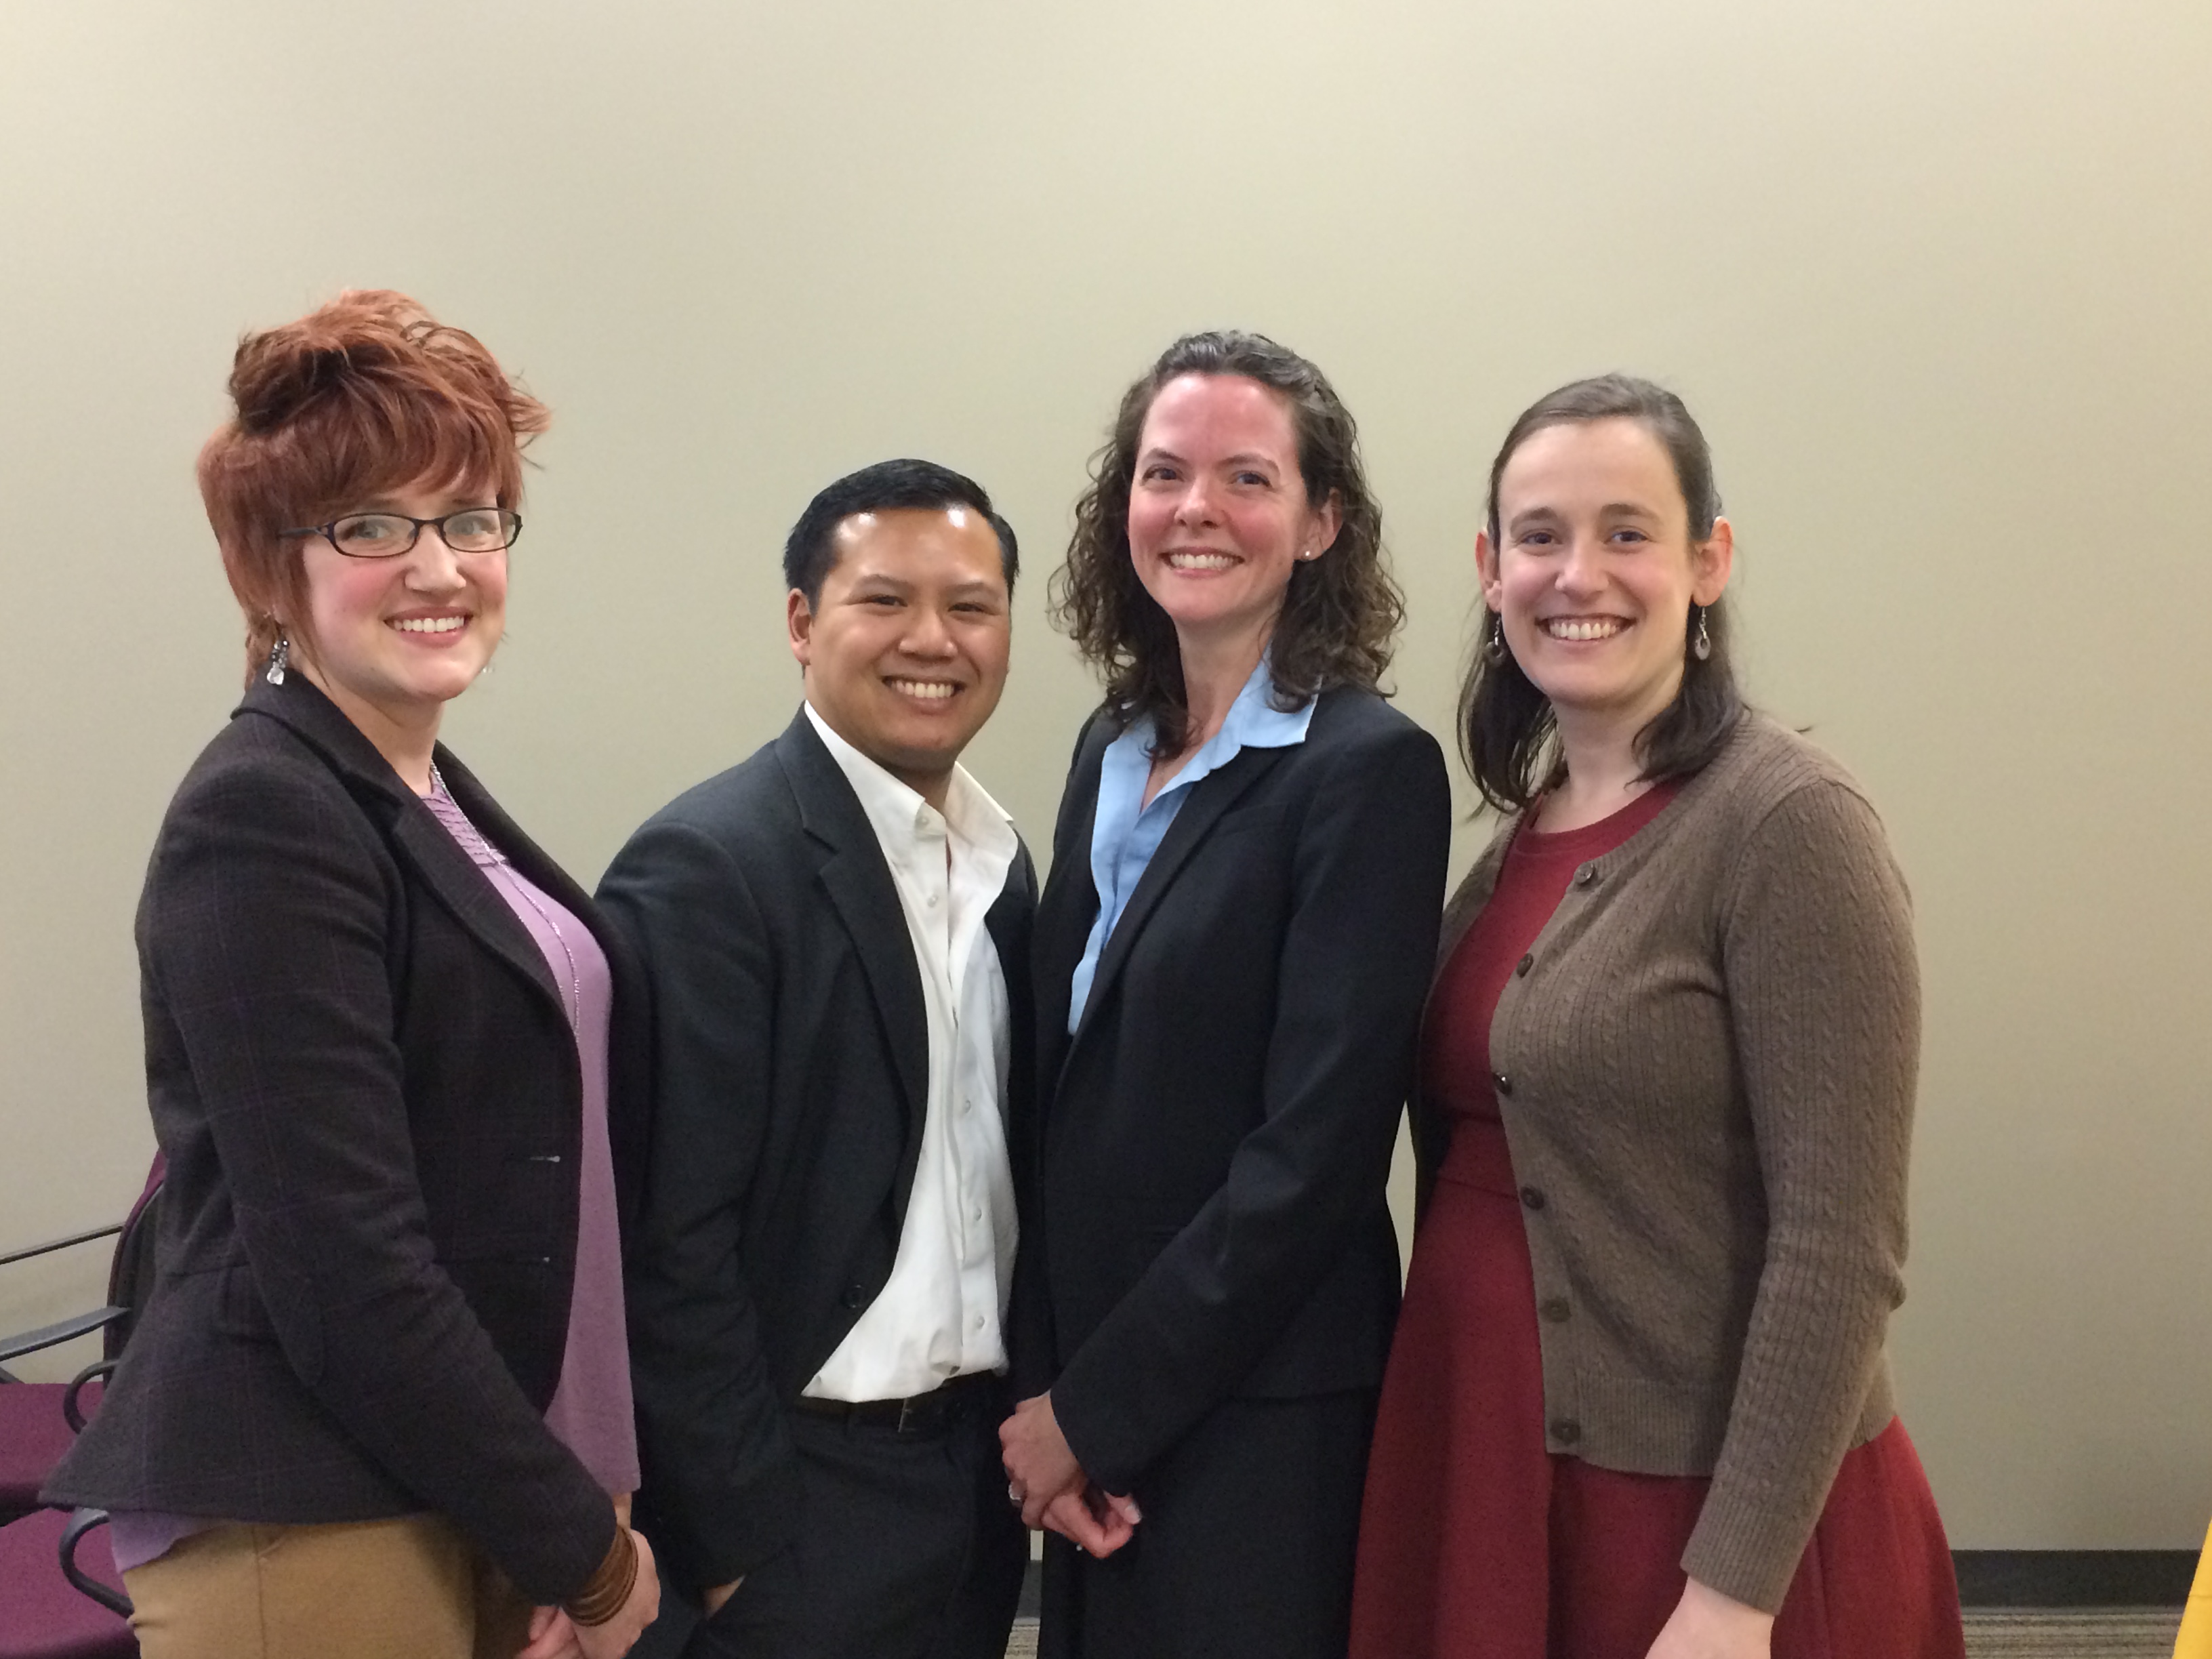 Winners of the 2016 3MT Maryland Competition: Ken Estrellas and Alexandra Pucsek